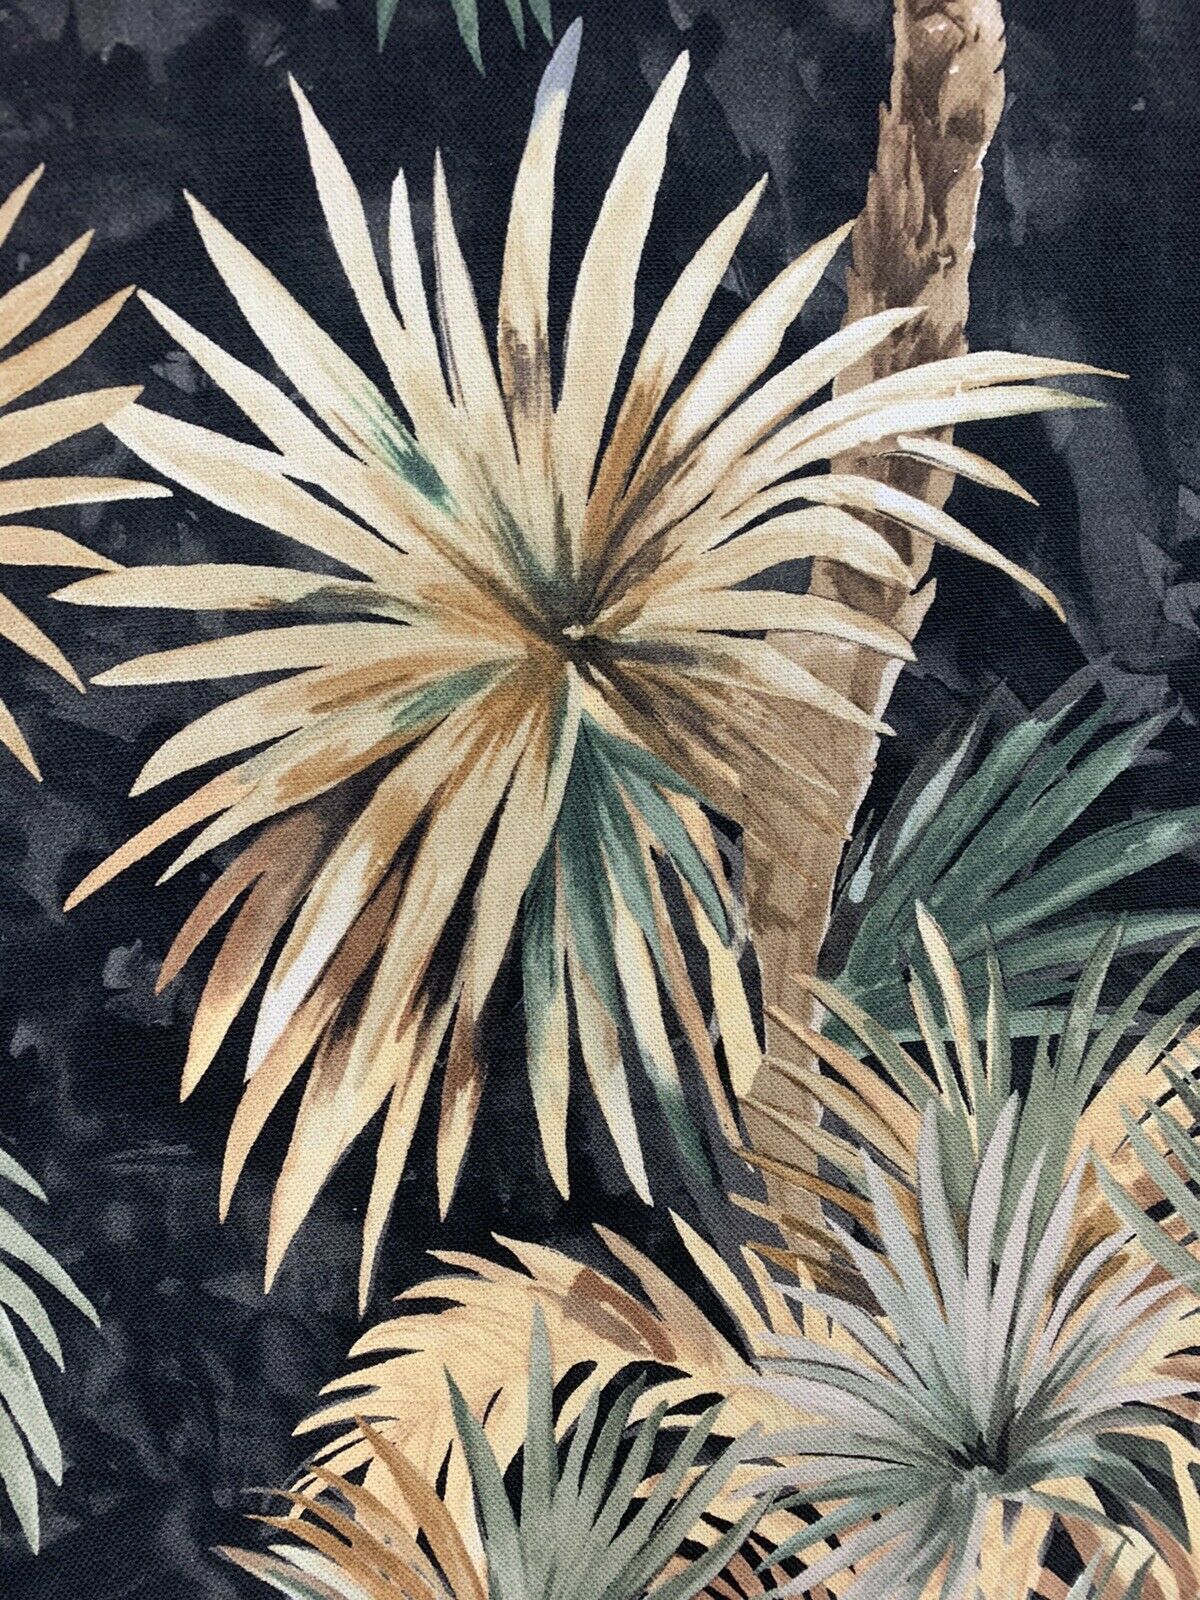 Haiti Palm Trees Black Cotton Fabric by Meter Yellow Floral Sewing Material Botanical Digital Print Textile